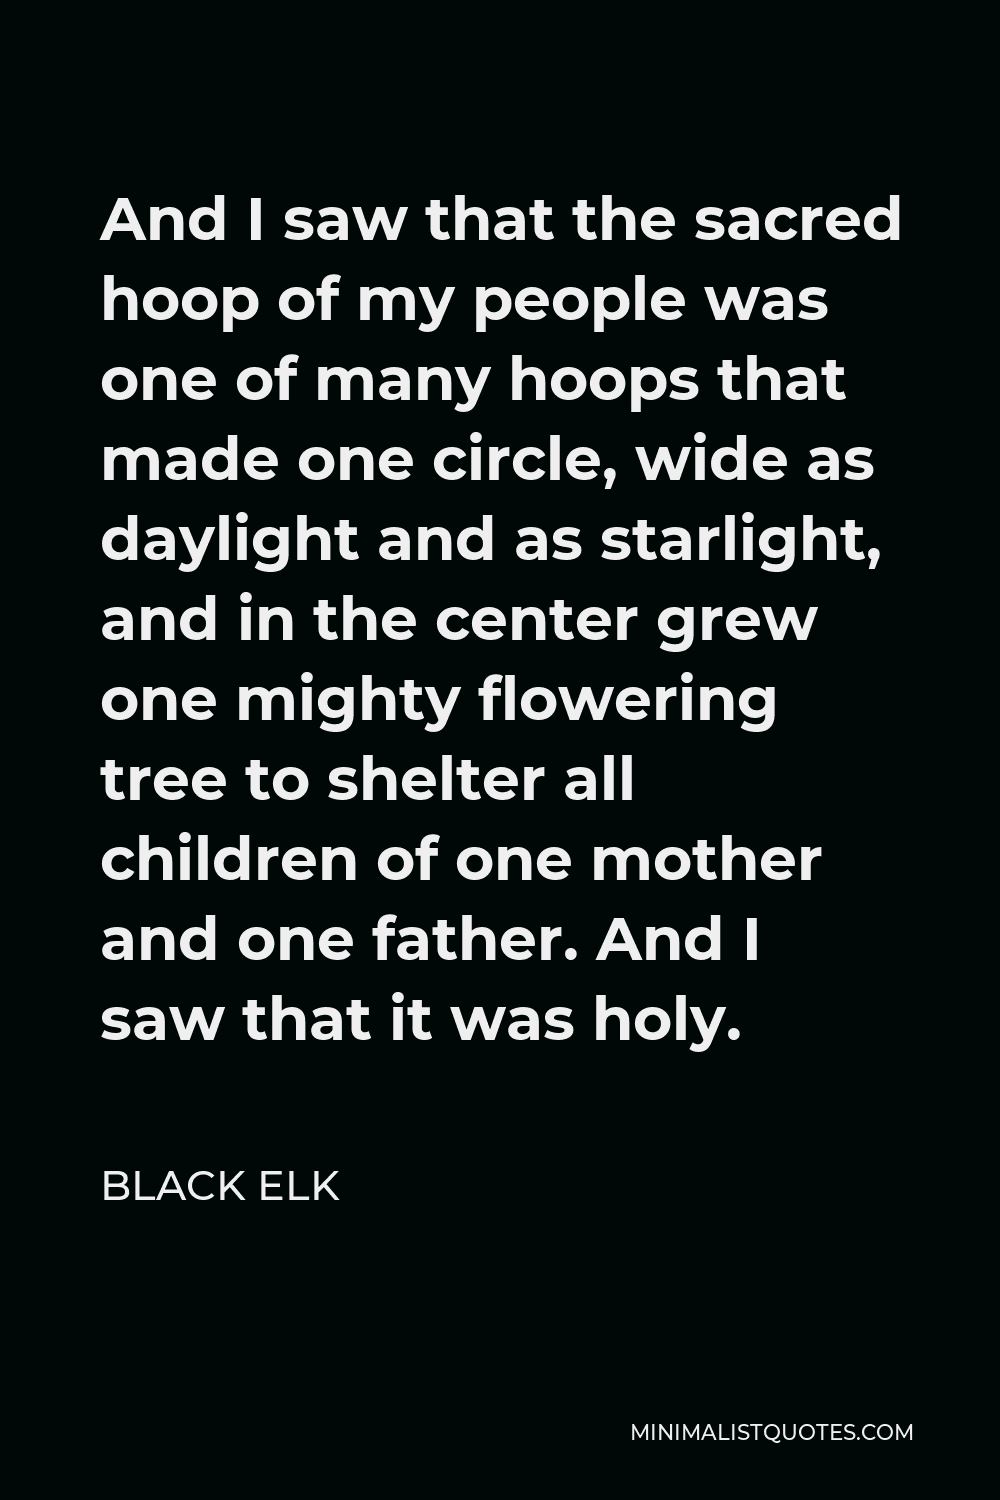 Black Elk Quote - And I saw that the sacred hoop of my people was one of many hoops that made one circle, wide as daylight and as starlight, and in the center grew one mighty flowering tree to shelter all children of one mother and one father. And I saw that it was holy.